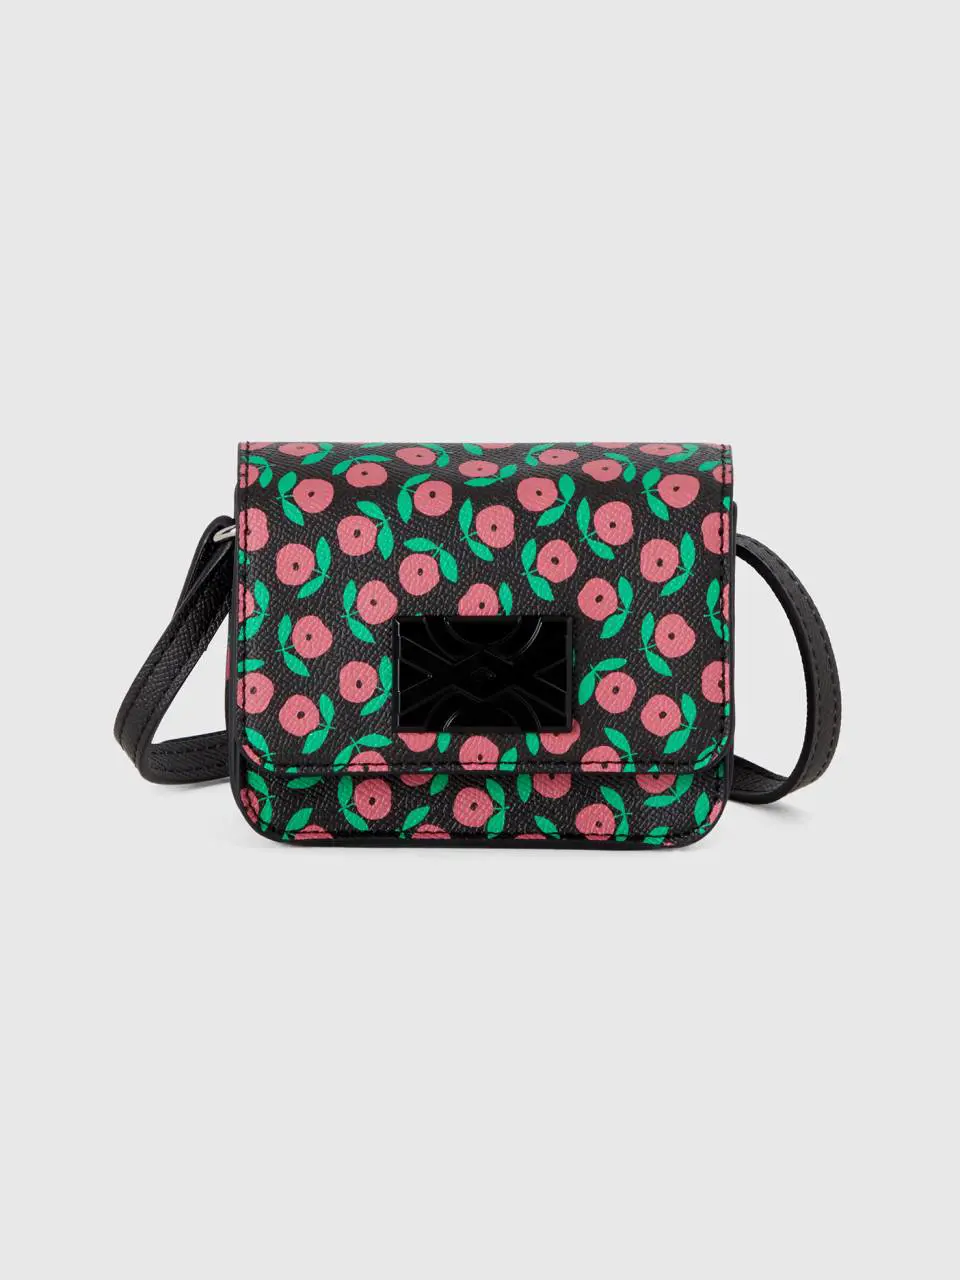 Benetton black mini be bag with pink flowers. 1